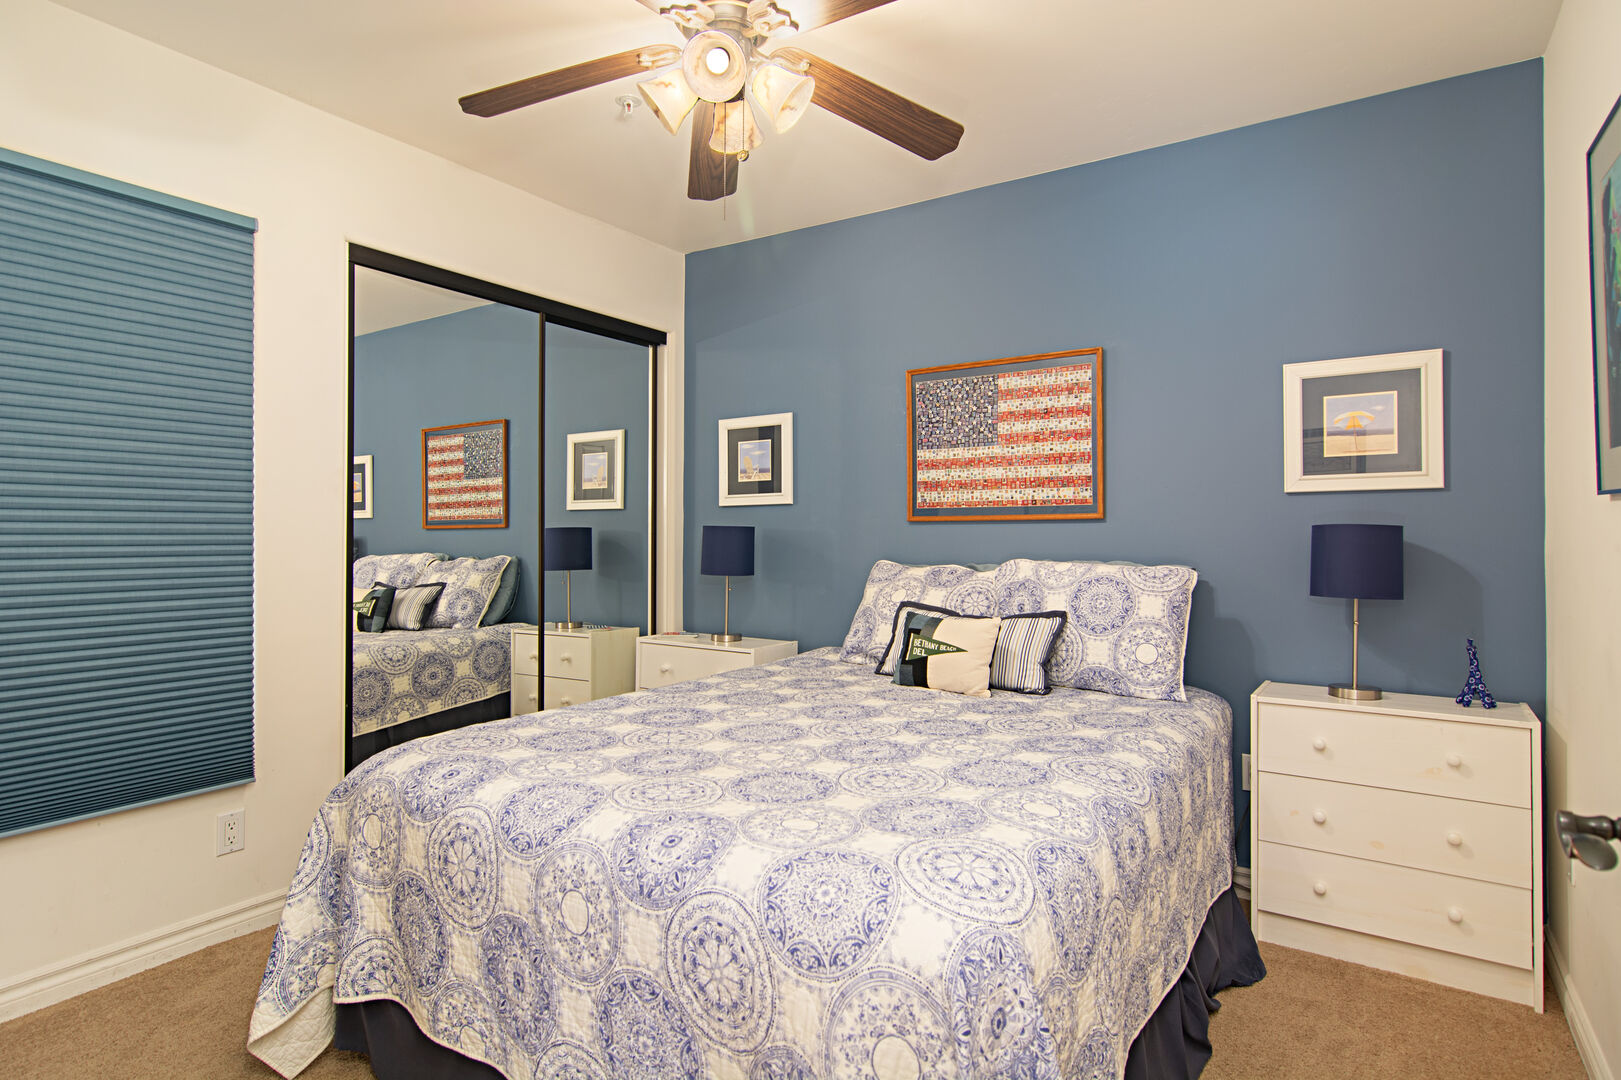 Downstairs guest bedroom with queen bed and ceiling fan